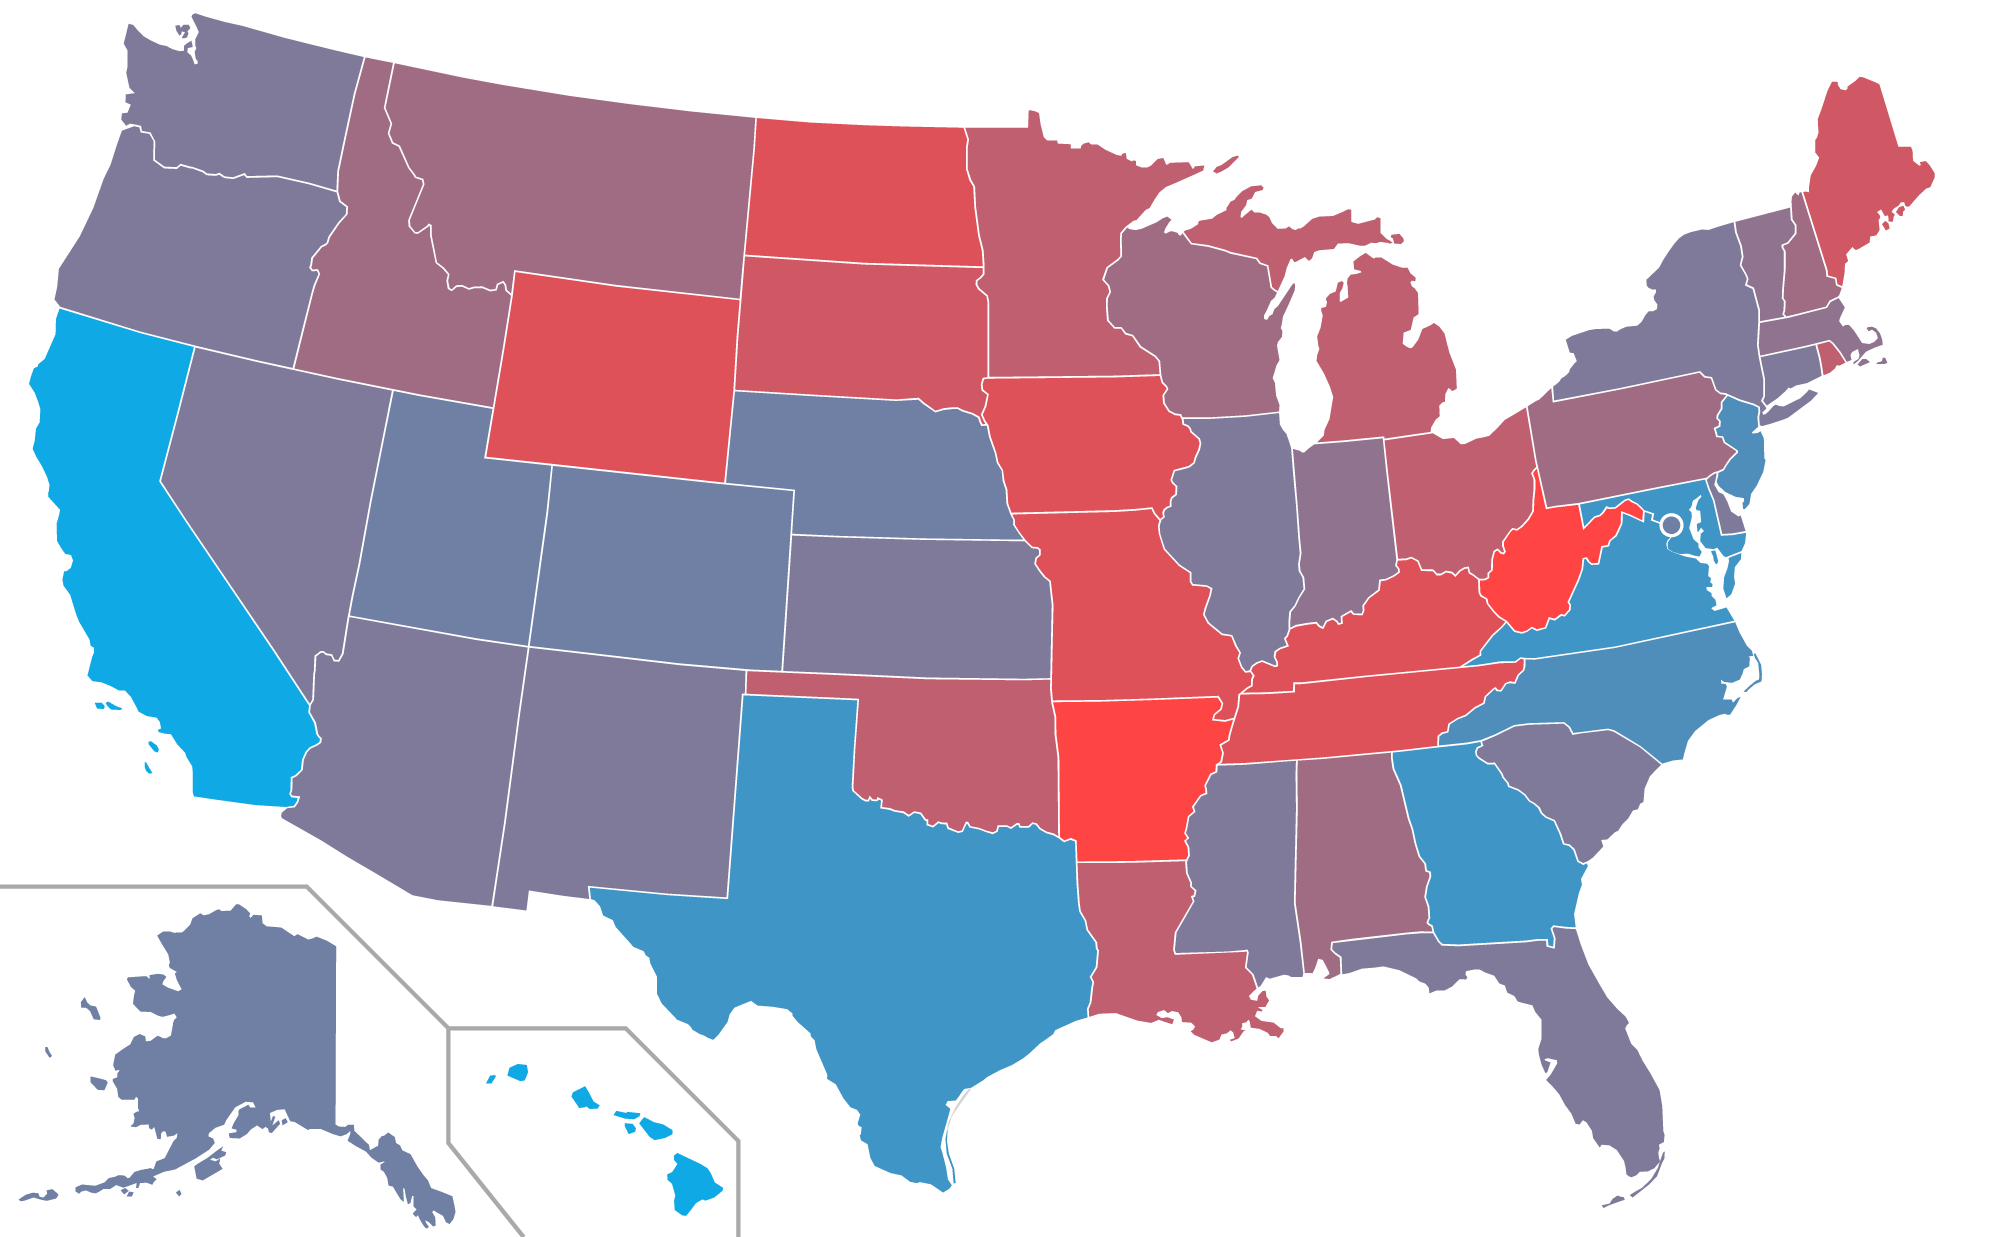 A picture of the United States with states colored by their drift over previous elections.